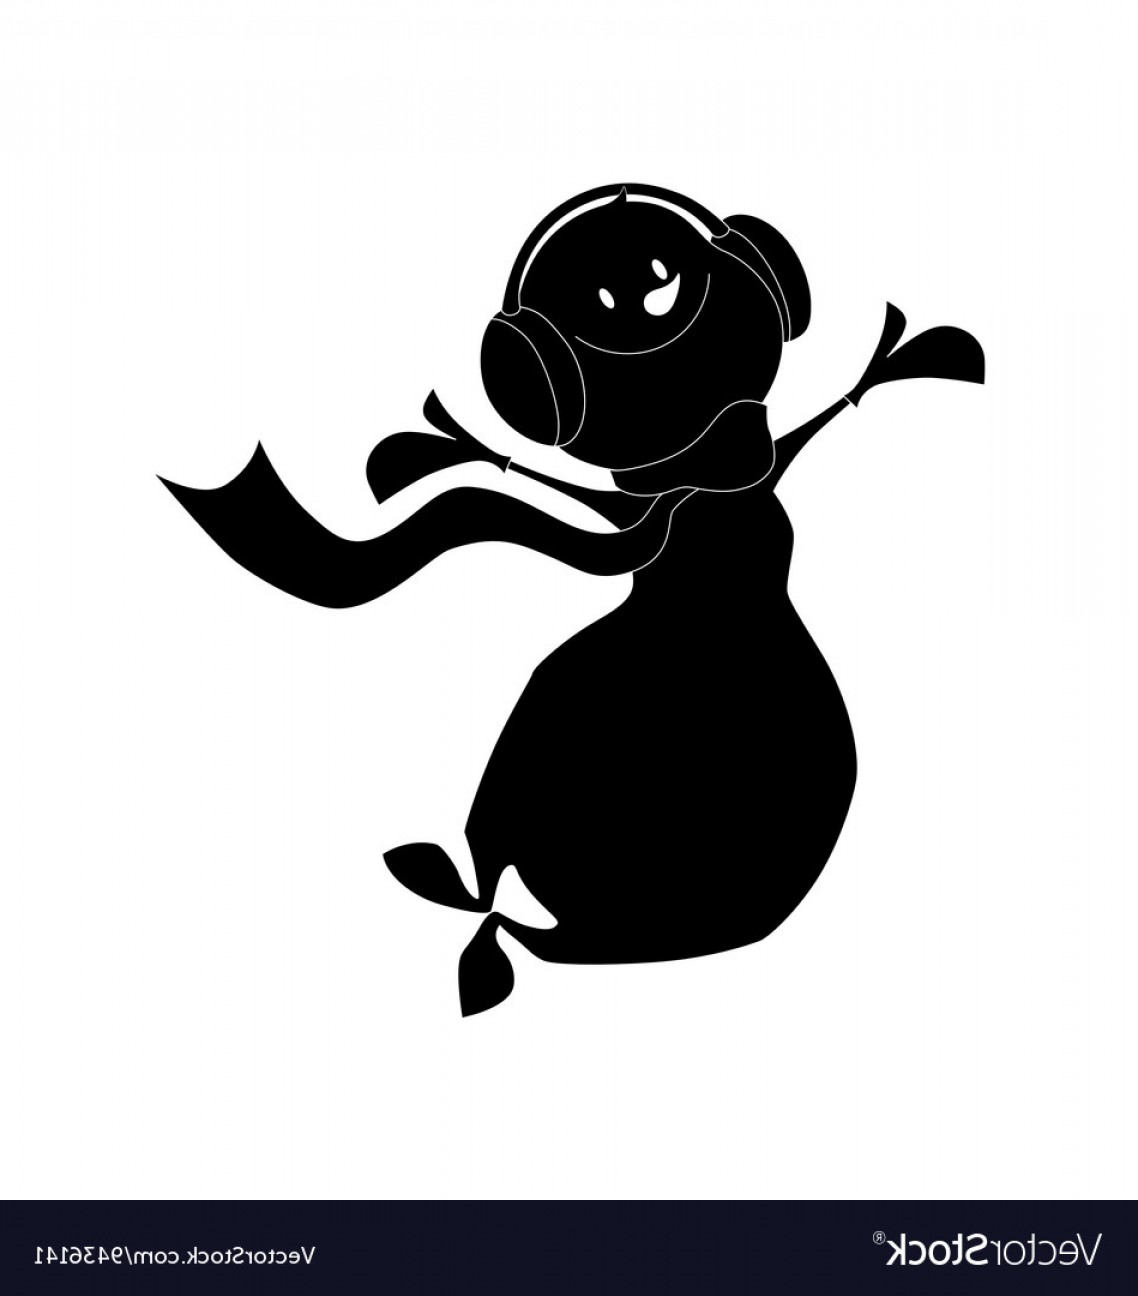 Download Snowman Silhouette Vector at Vectorified.com | Collection ...